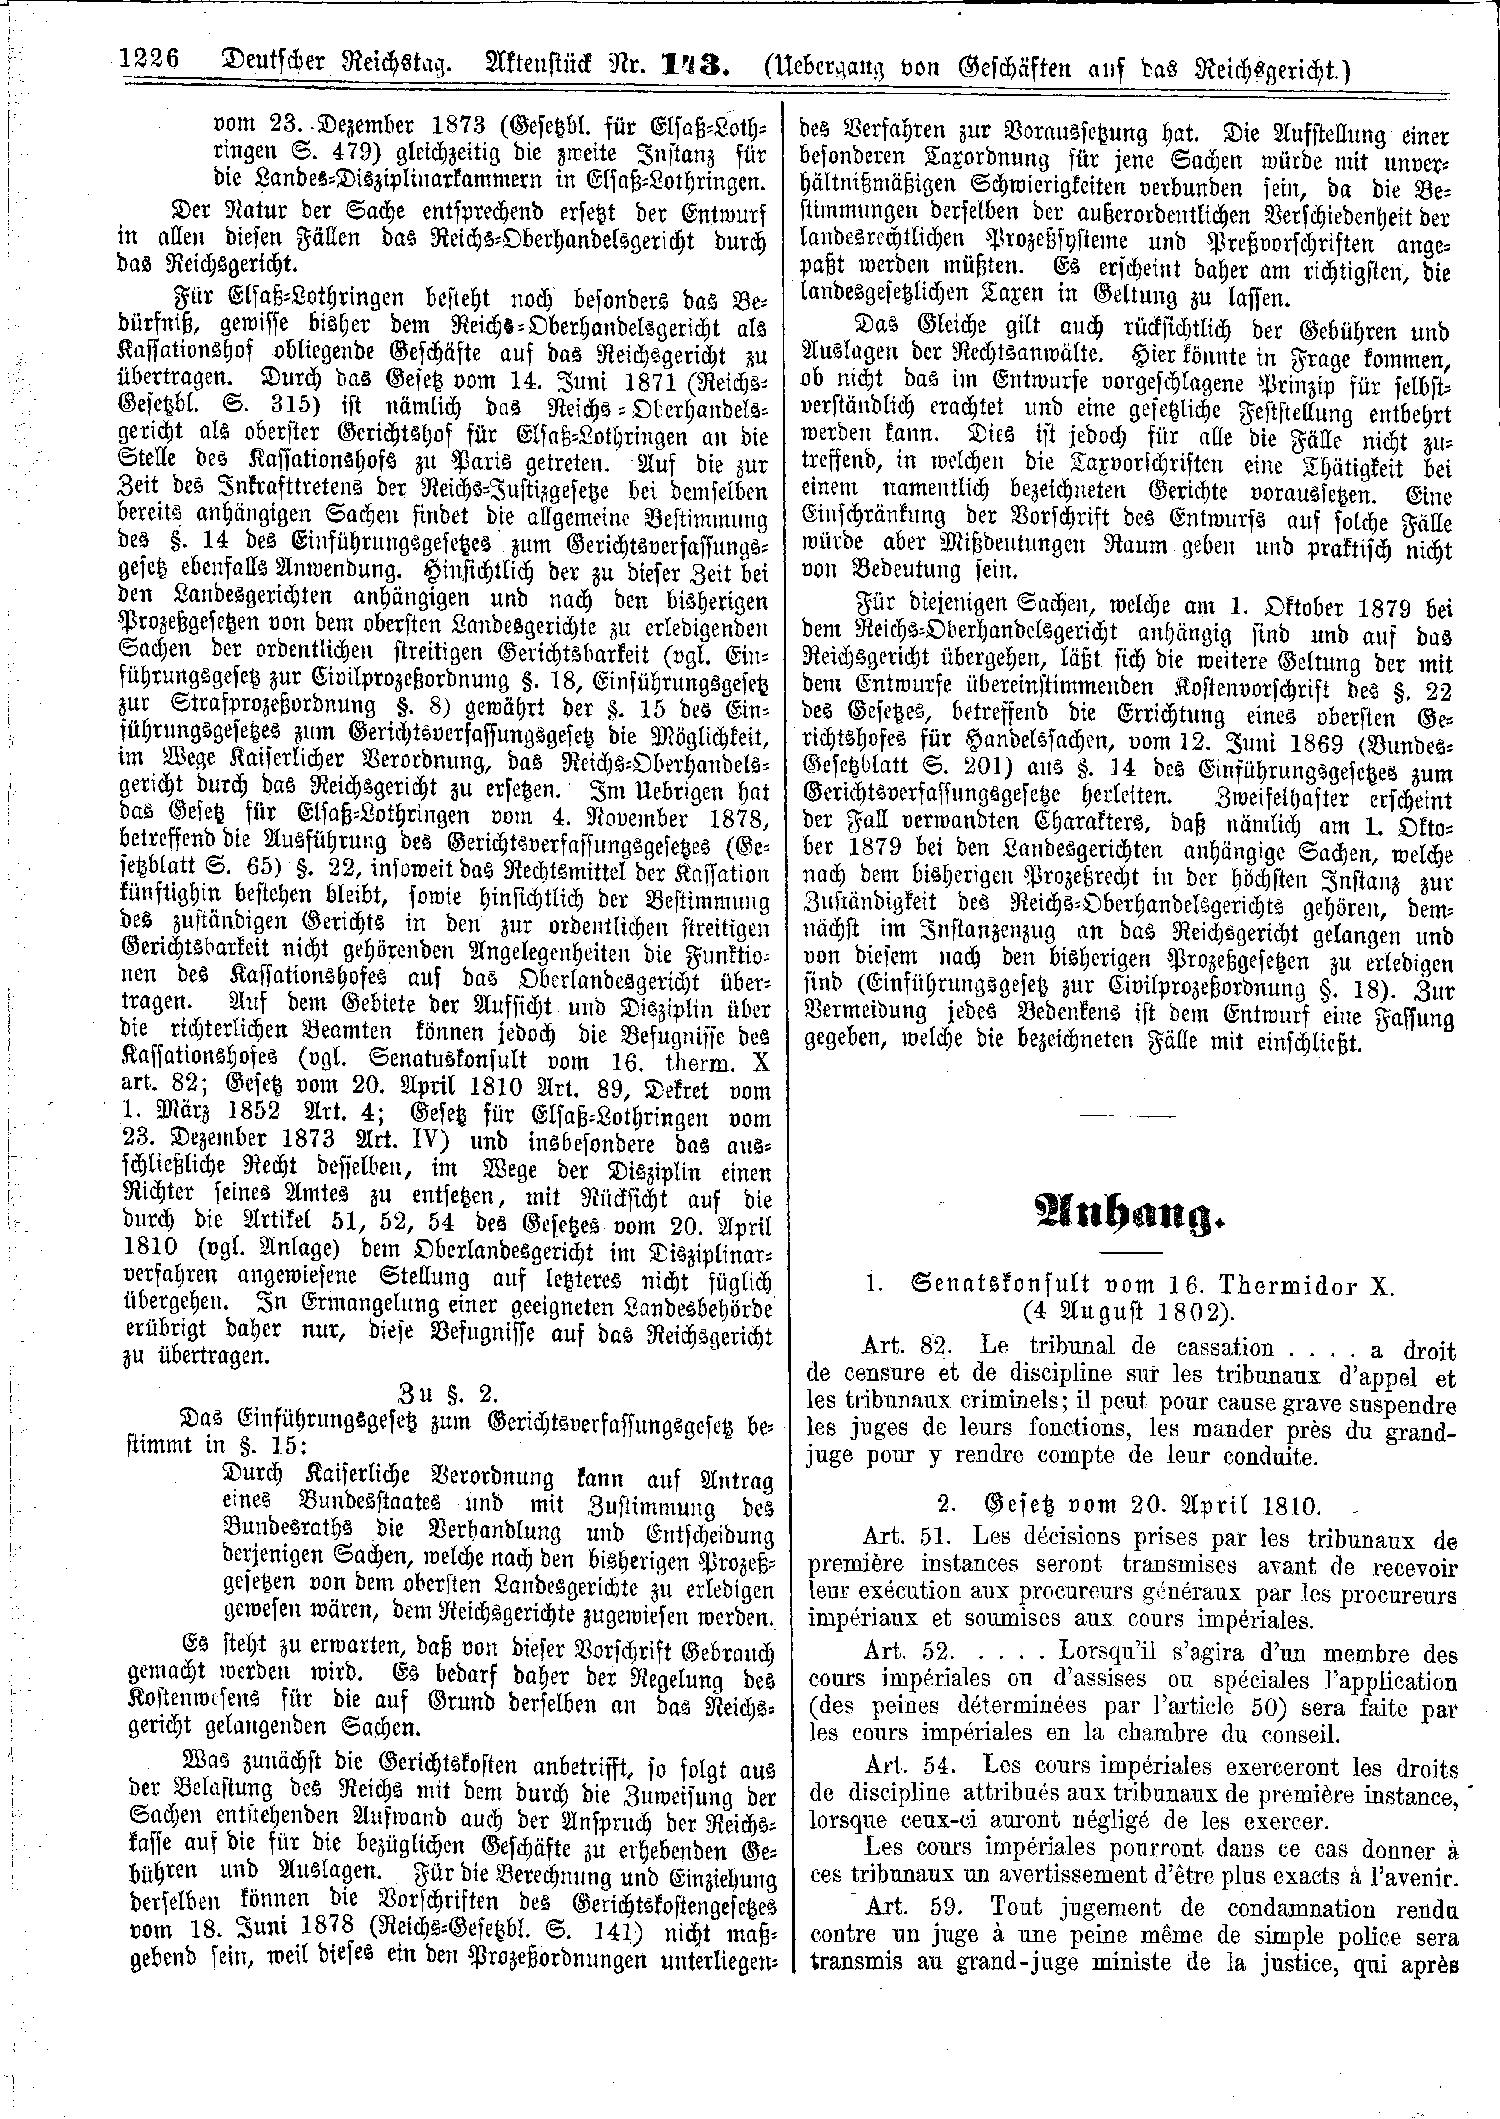 Scan of page 1226